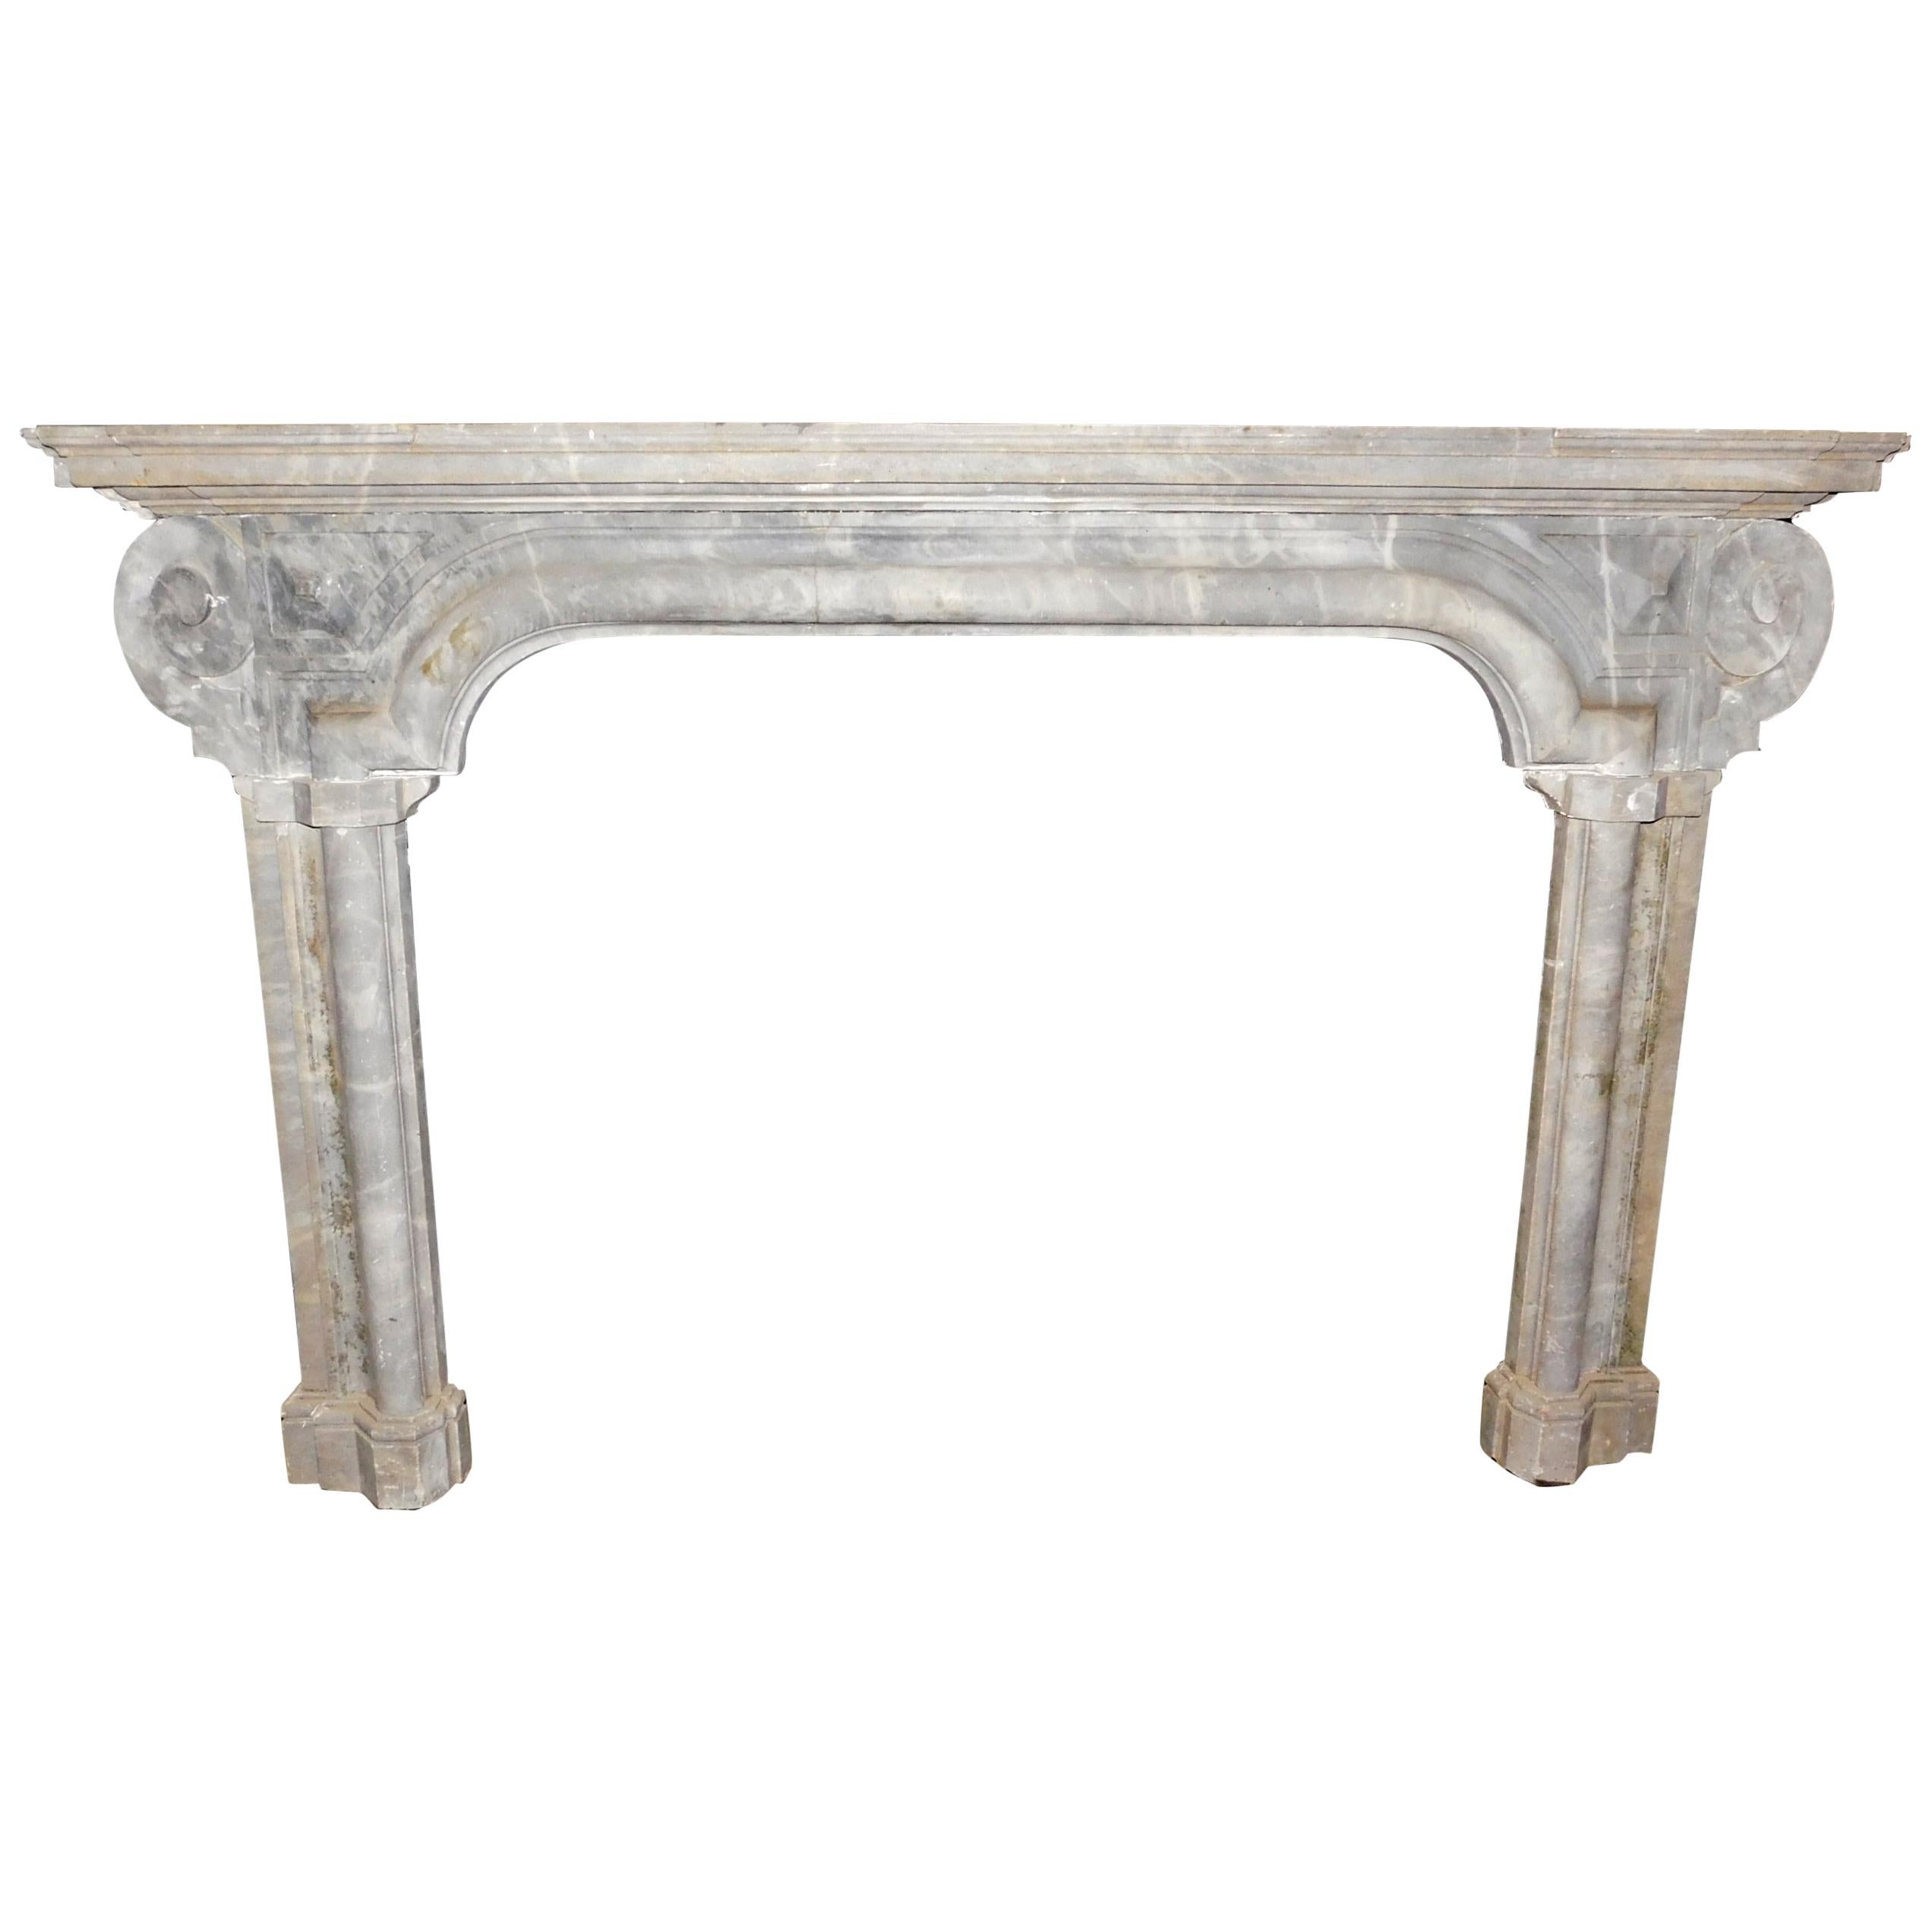 Antique Bardiglio Gray Marble Fireplace, 18th Century Italy